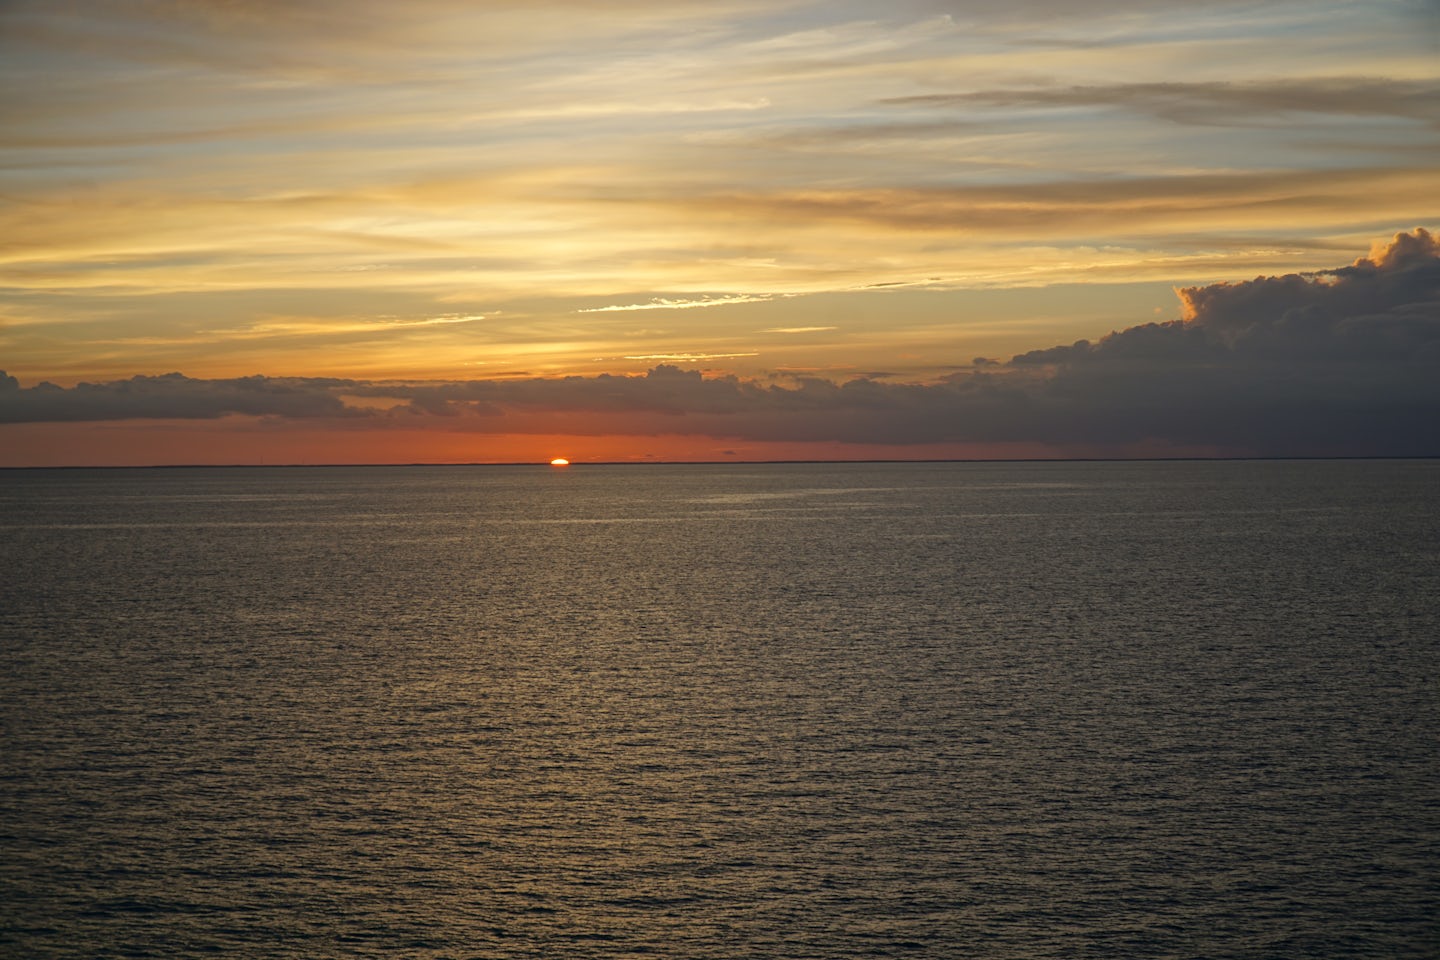 Sunsets at sea are amazing.